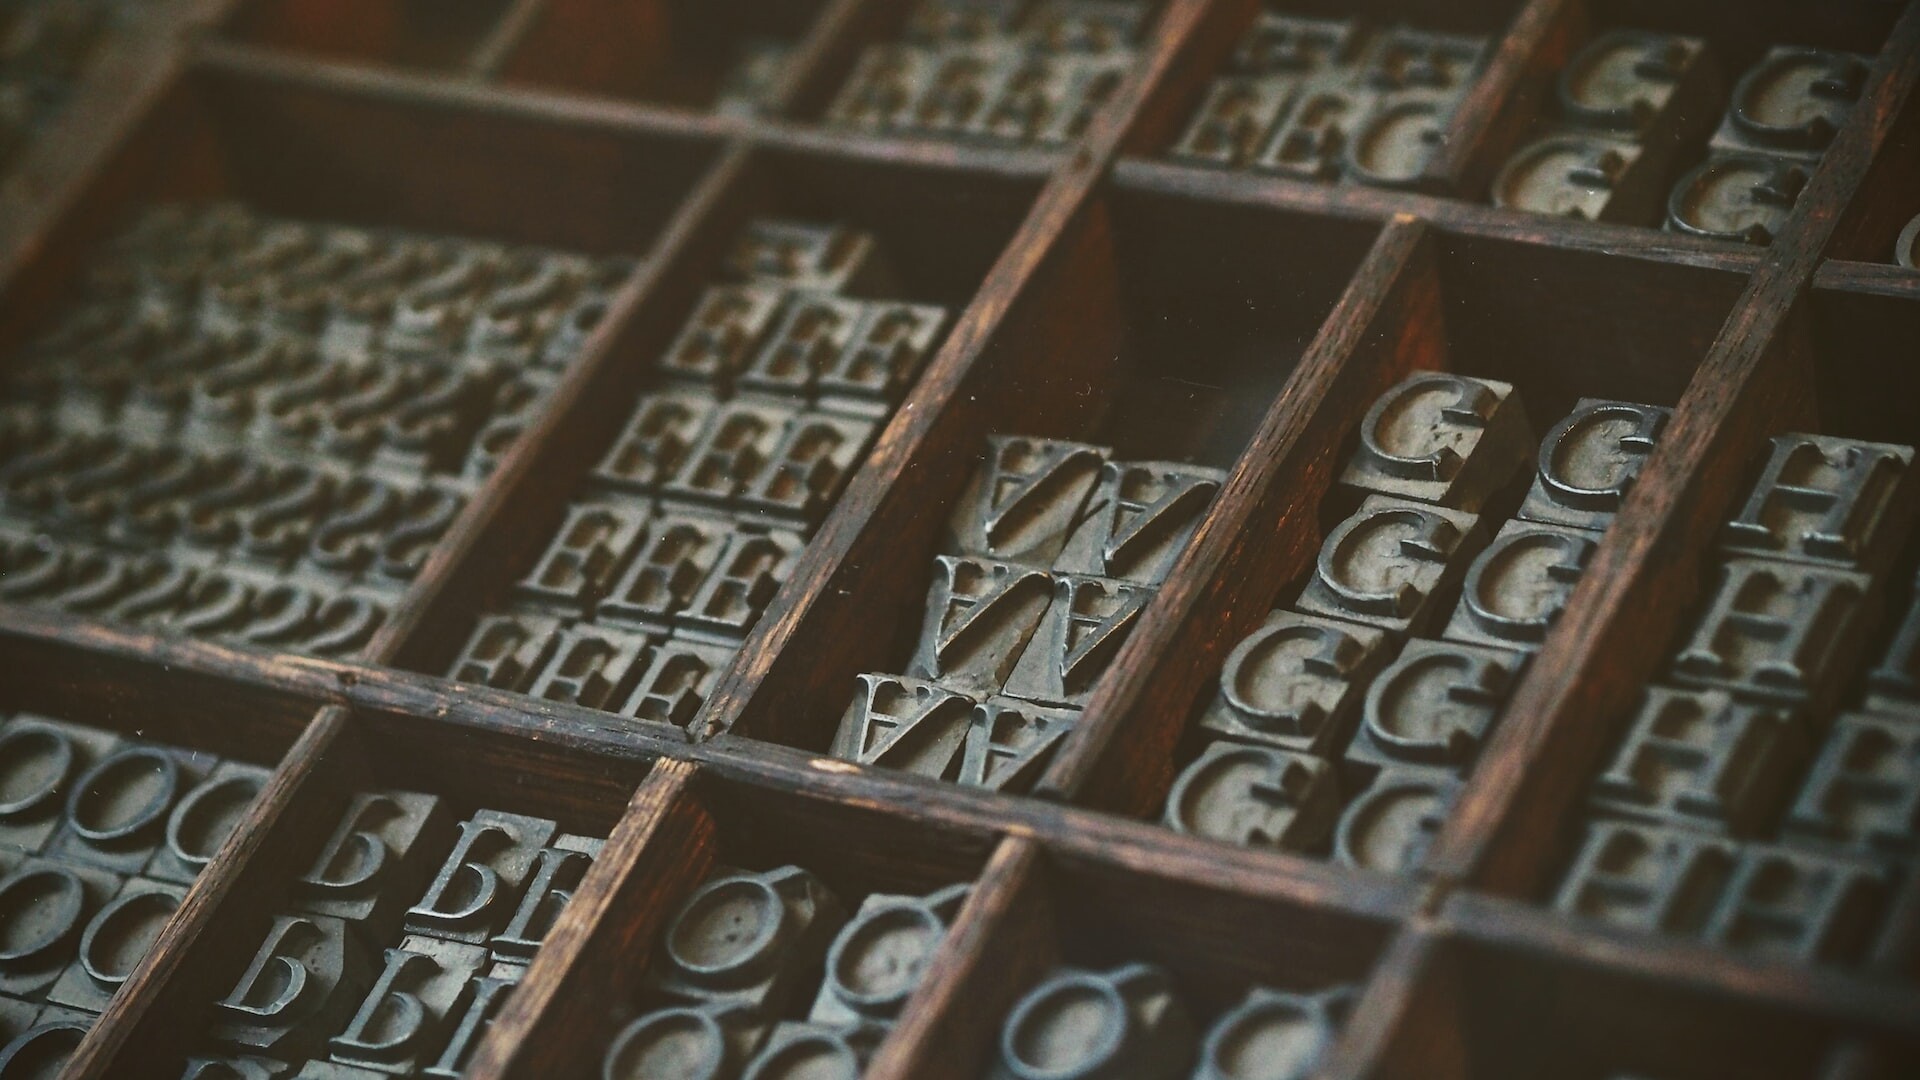 Image of individual letters used for printing. 